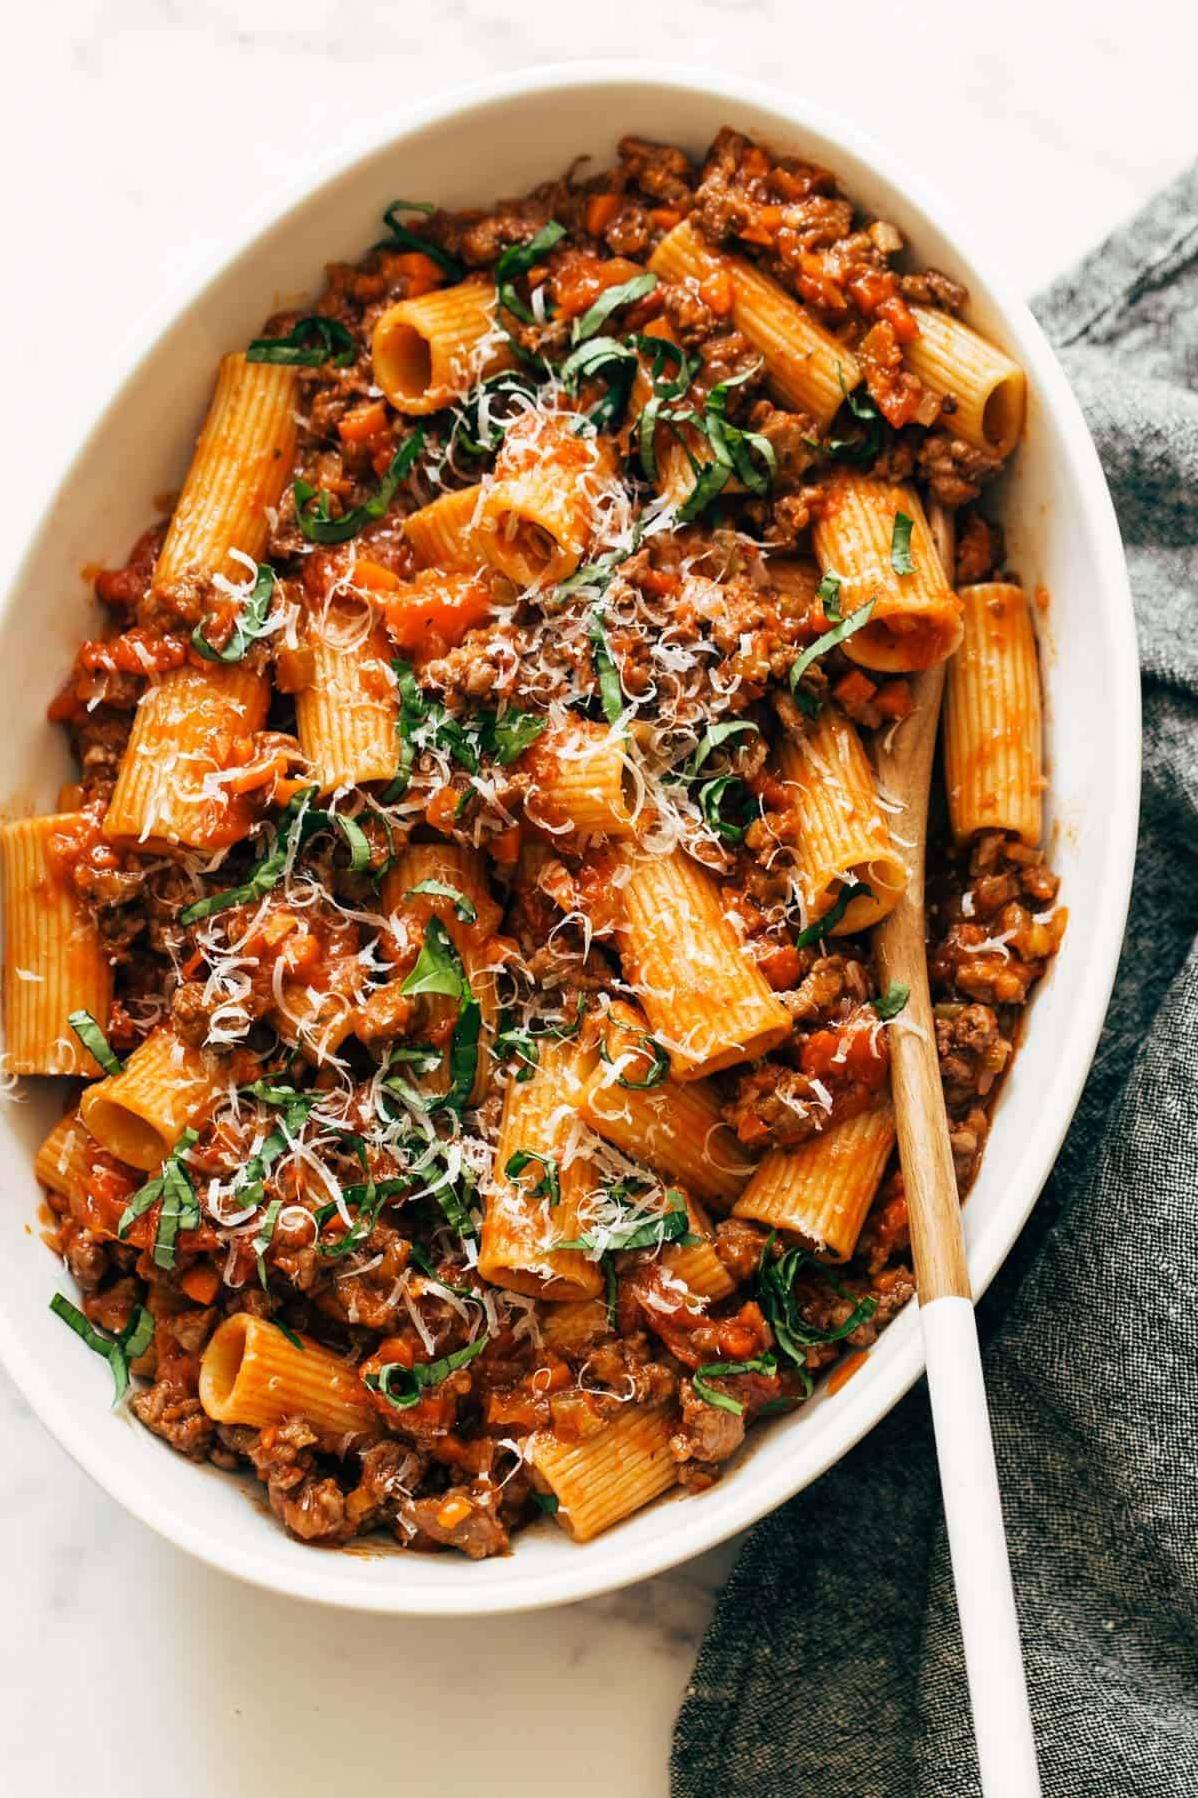  This pasta dish is the definition of comfort food.